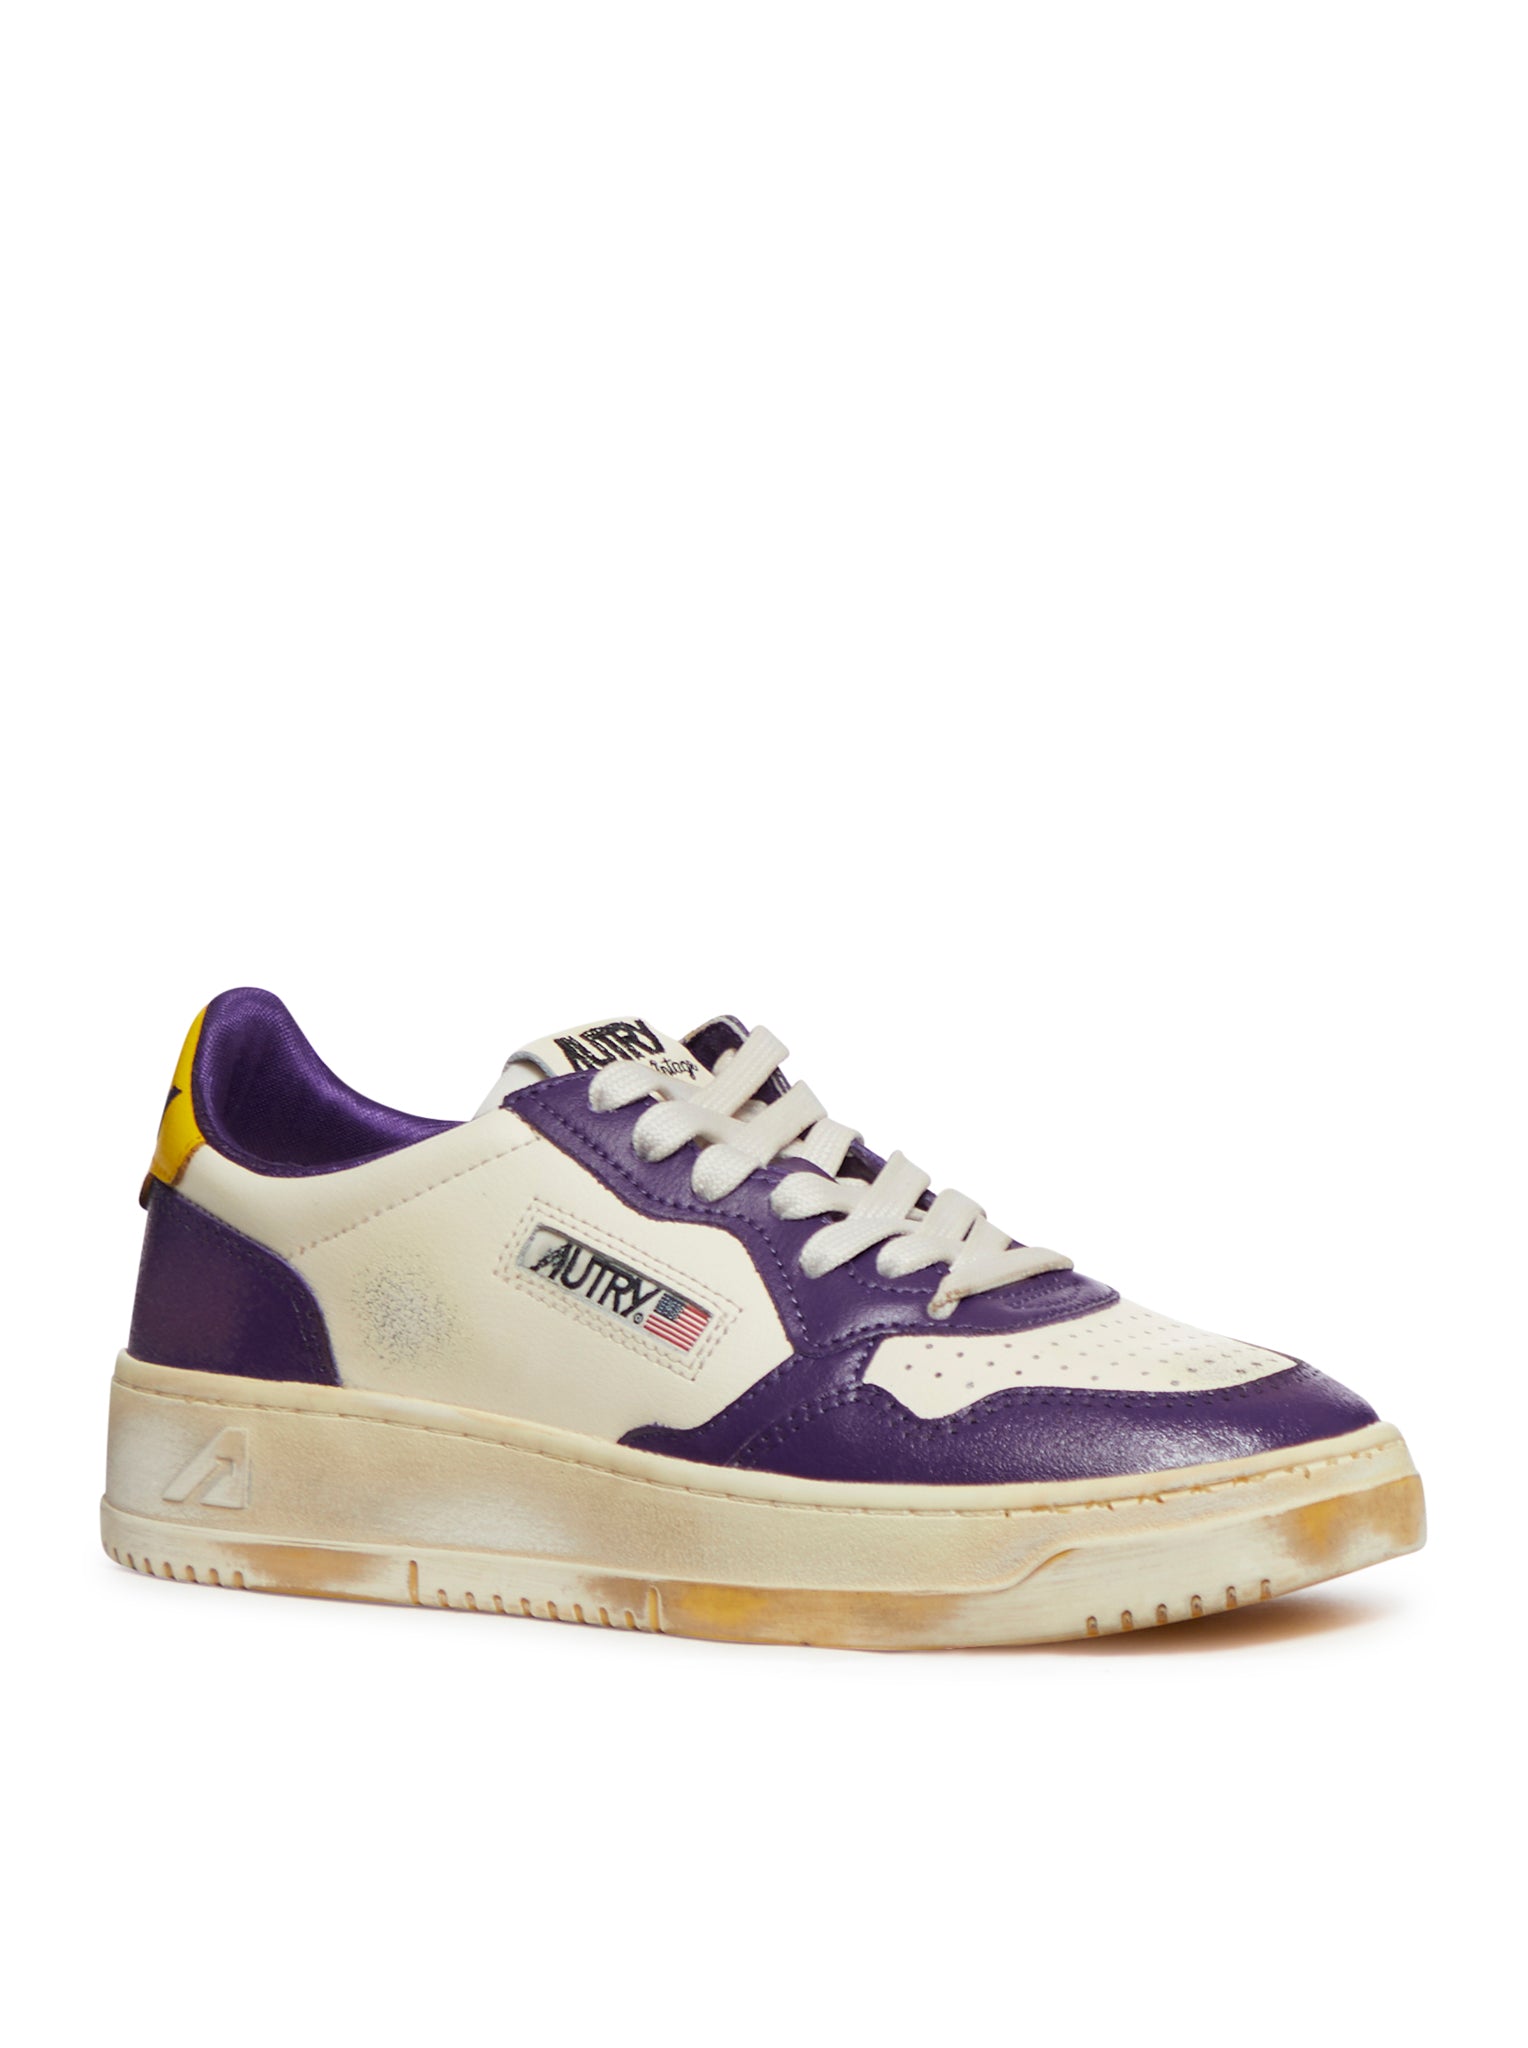 Super vintage Medalist low women`s sneakers in white and purple leather